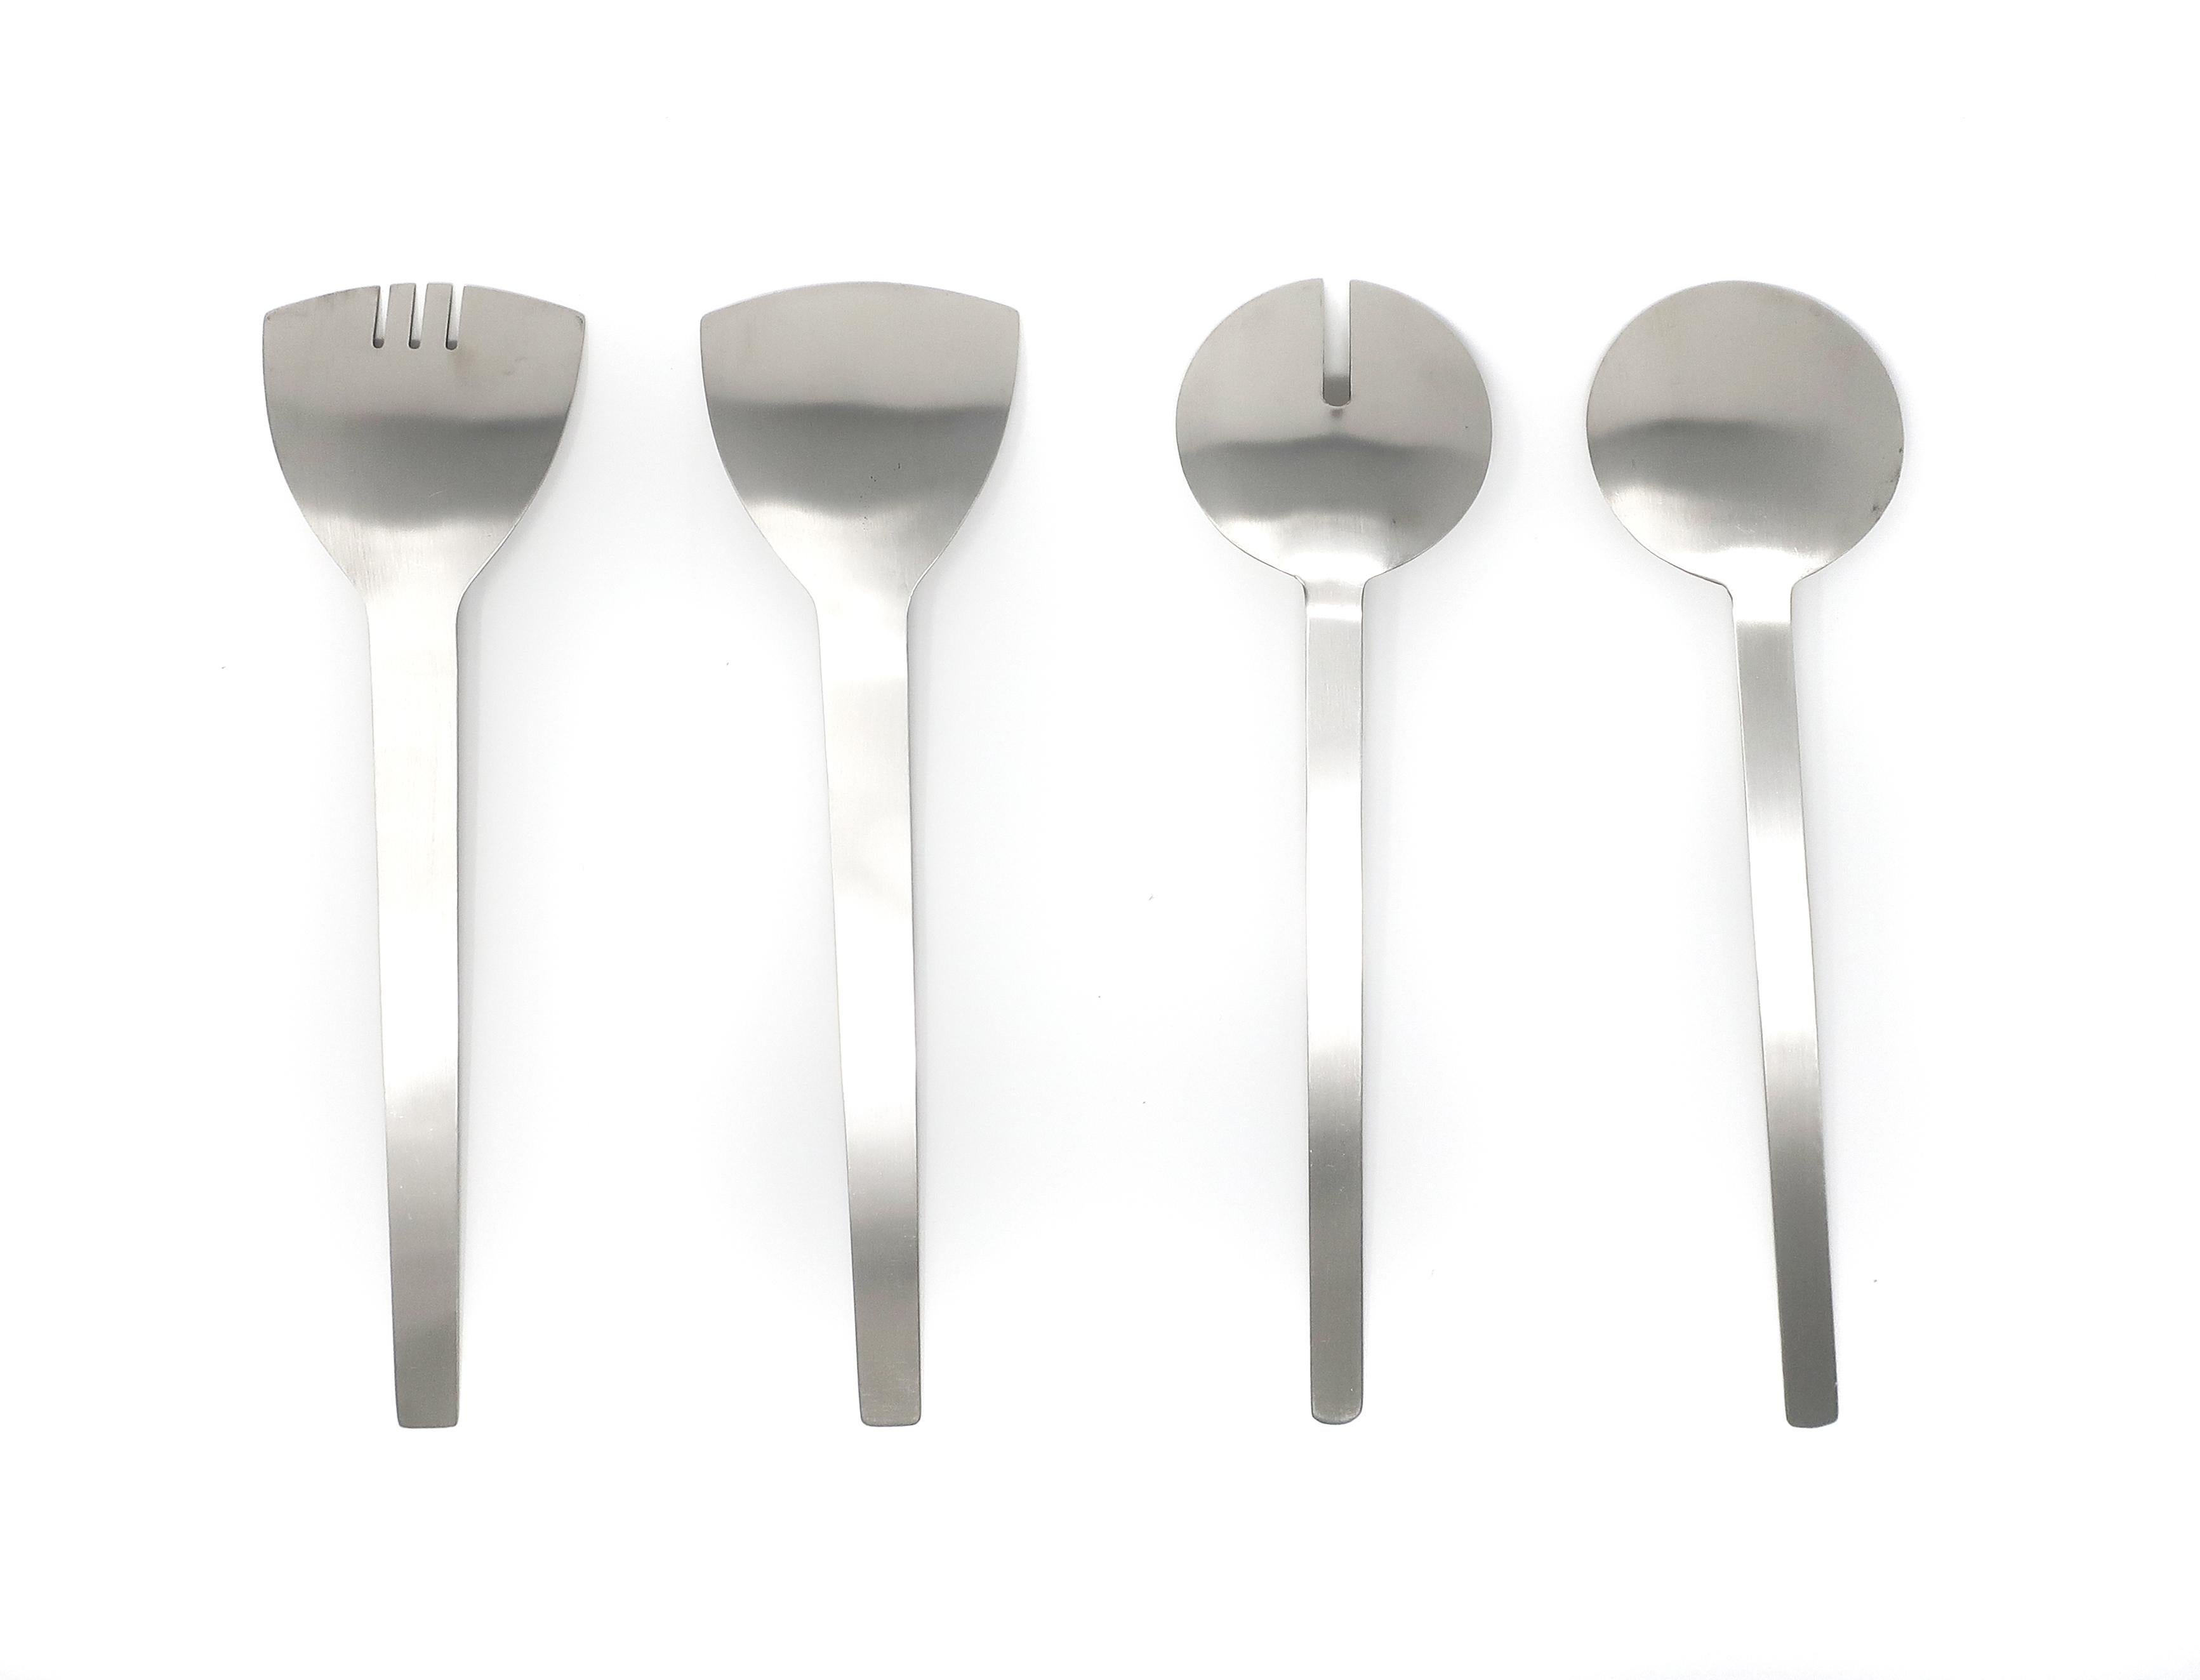 A handsome set of four 1980s Art Deco-inspired serving utensils. All have thin and elegant stainless steel handles, two with round heads and two have triangular heads. In excellent vintage condition with no signs of use. No maker’s